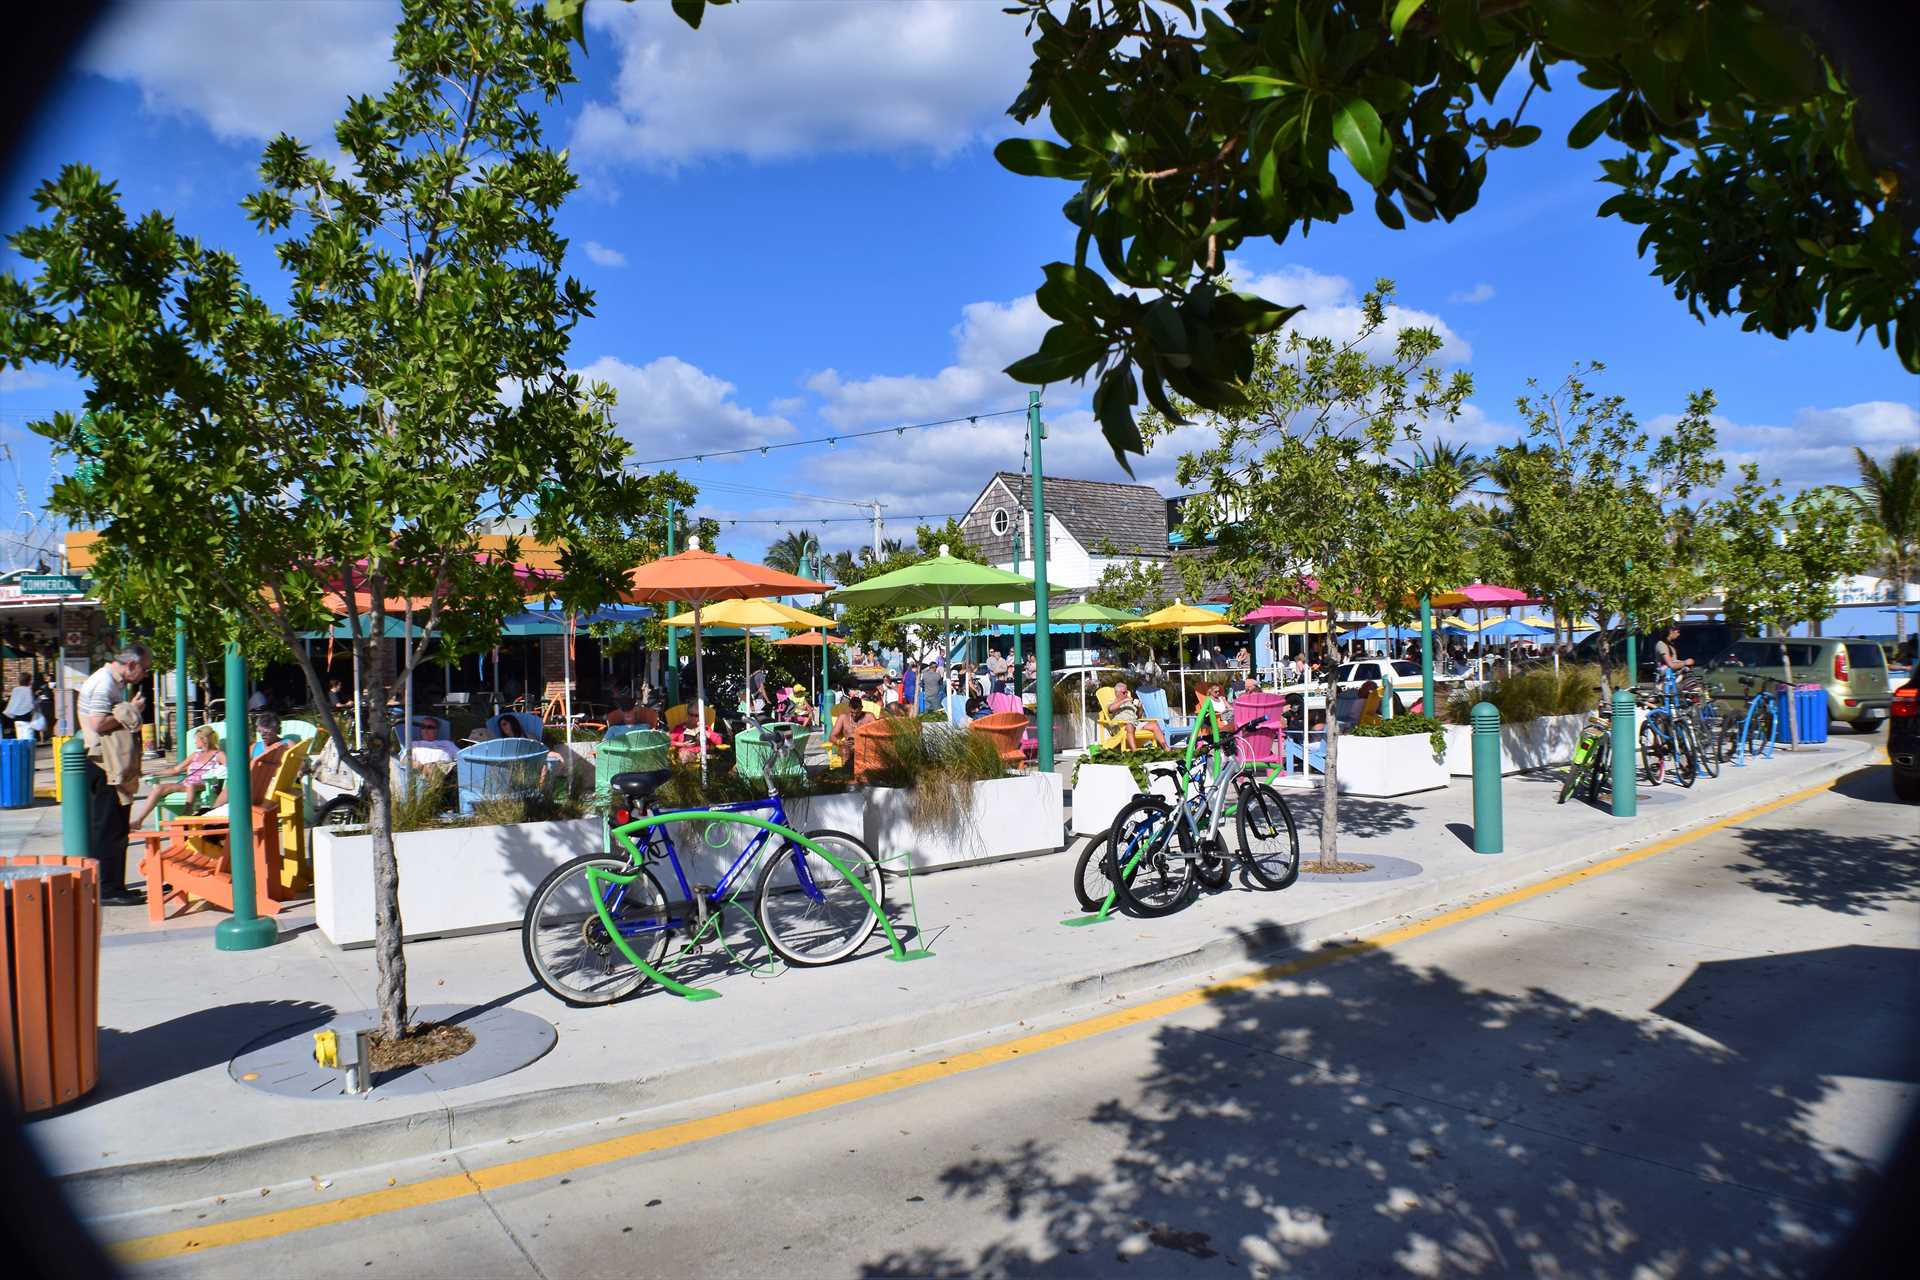 Your walk to the beach is filled with colorful shops and sig